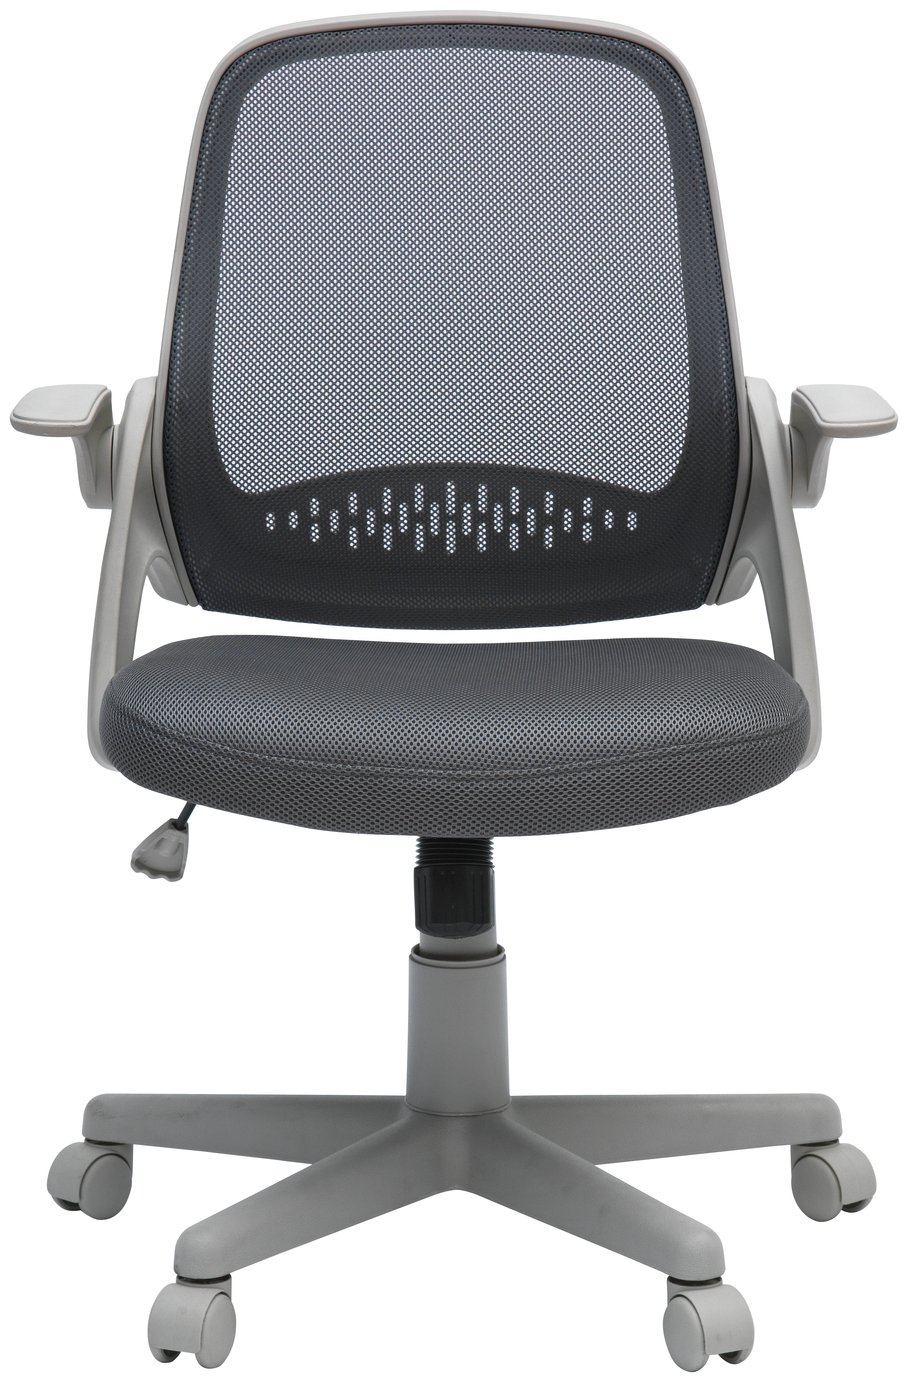 Argos Home Turing Office Chair Reviews